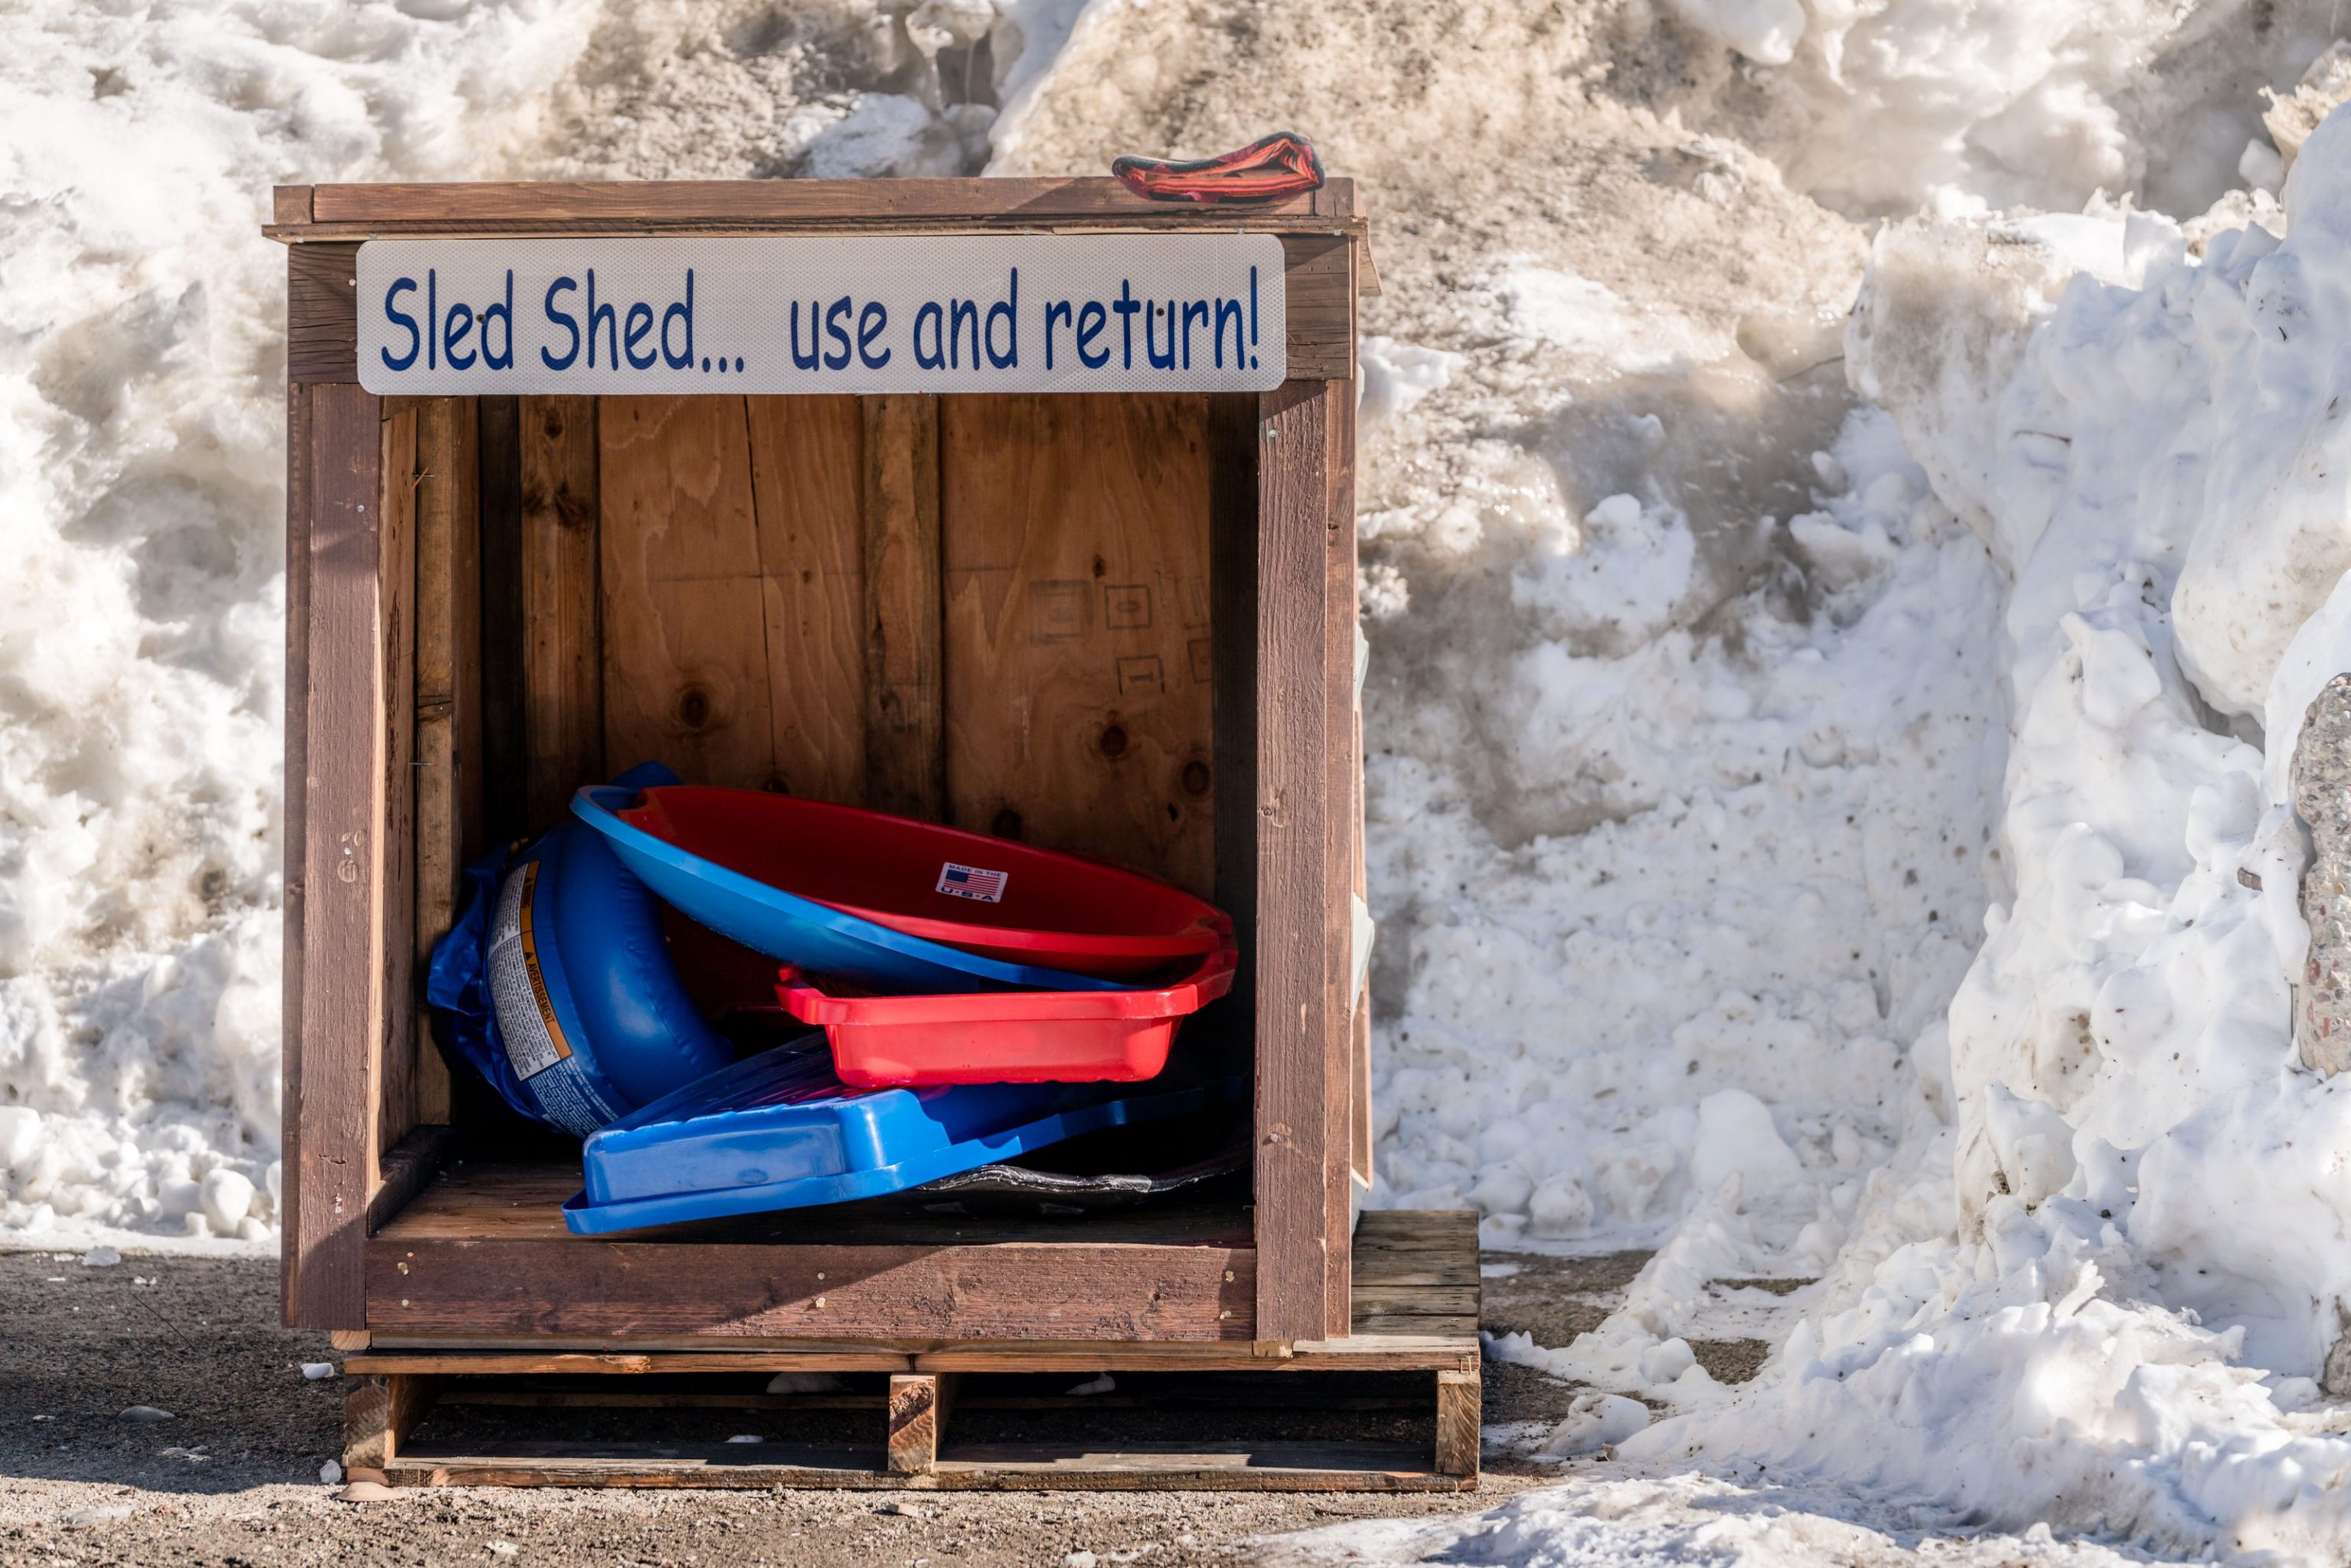 Sled Shed at the Runway sledding hill in Breckenridge 